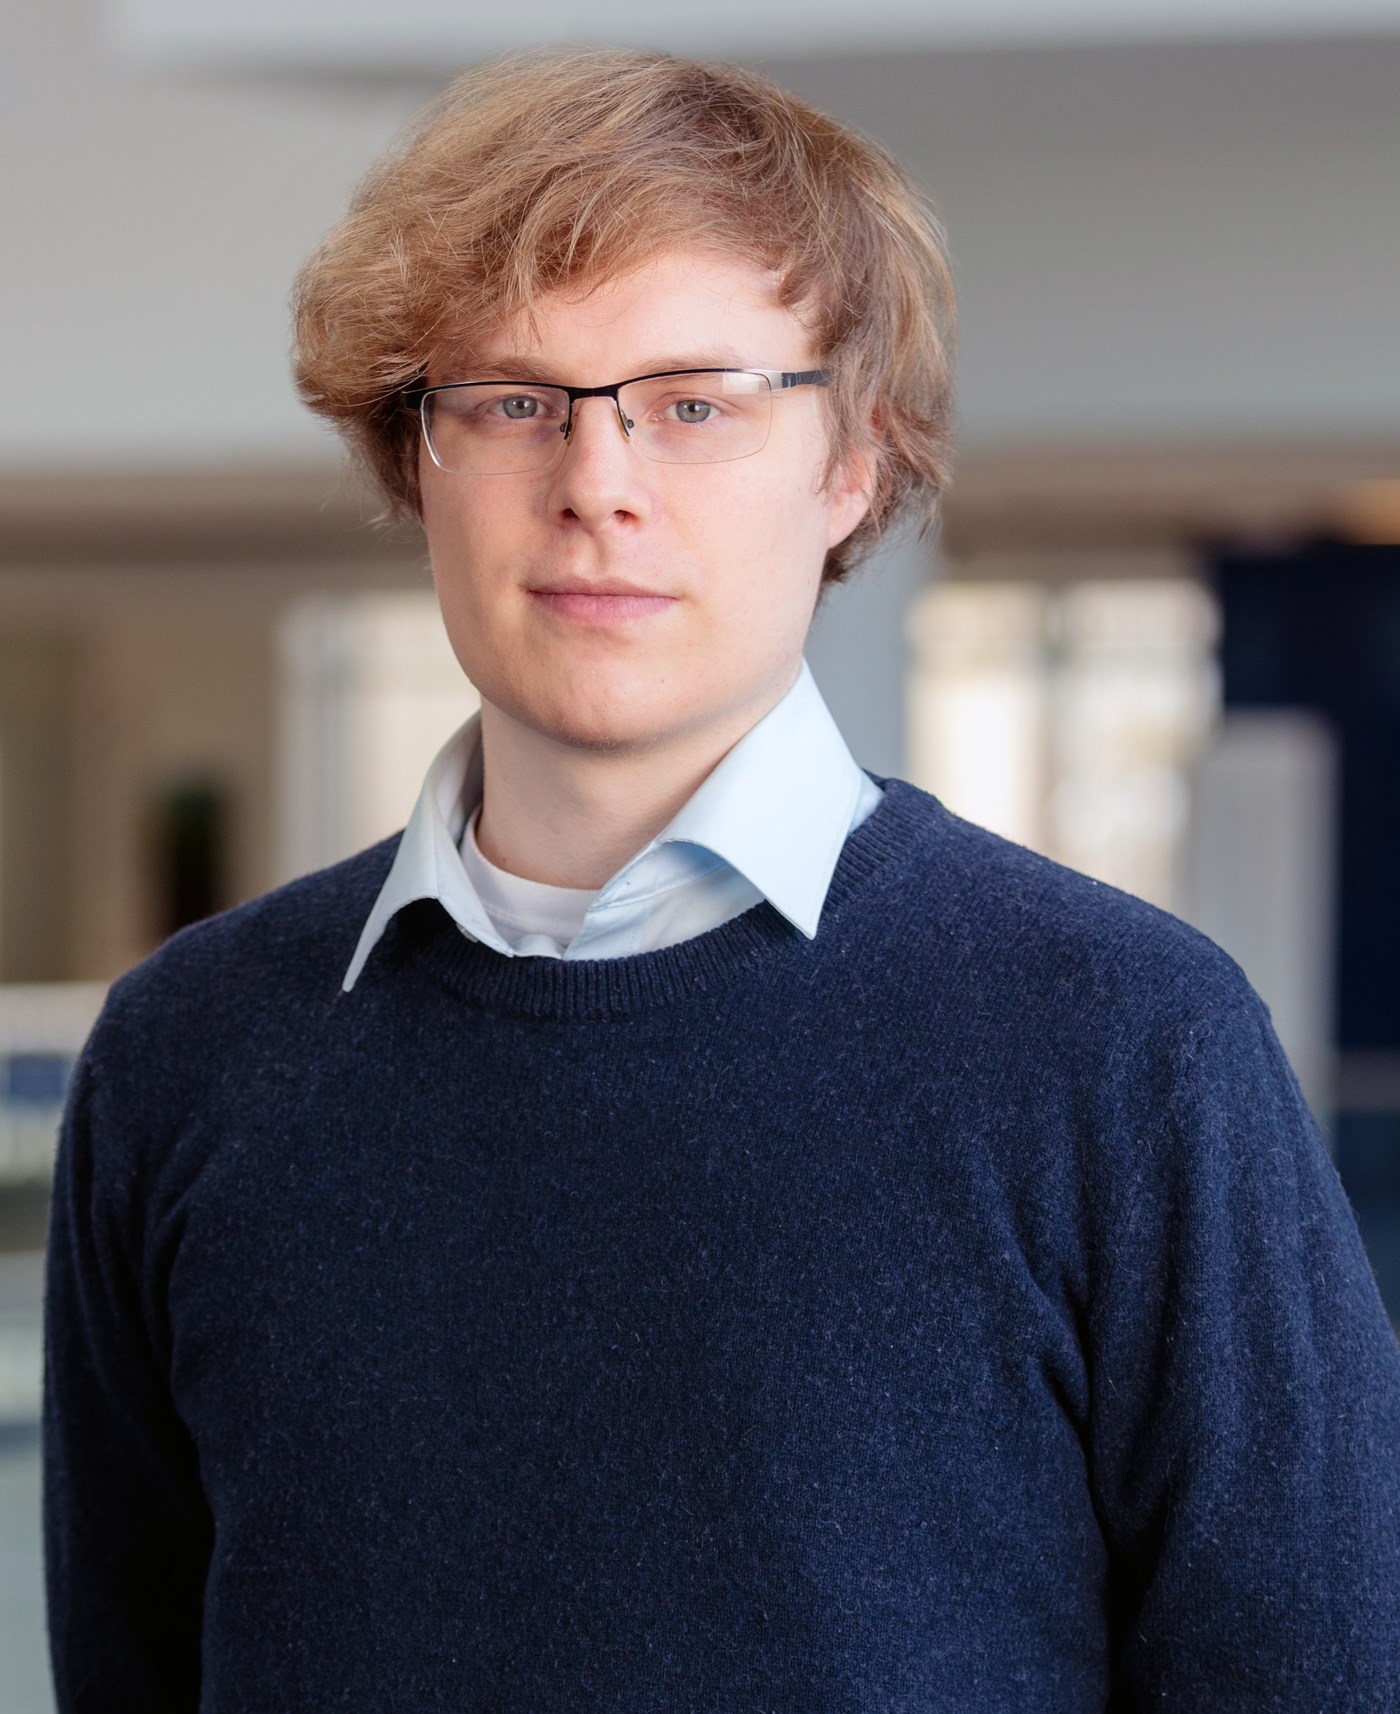 Joris Roos is an Assistant Professor in the Mathematical Sciences Department at UMass Lowell.